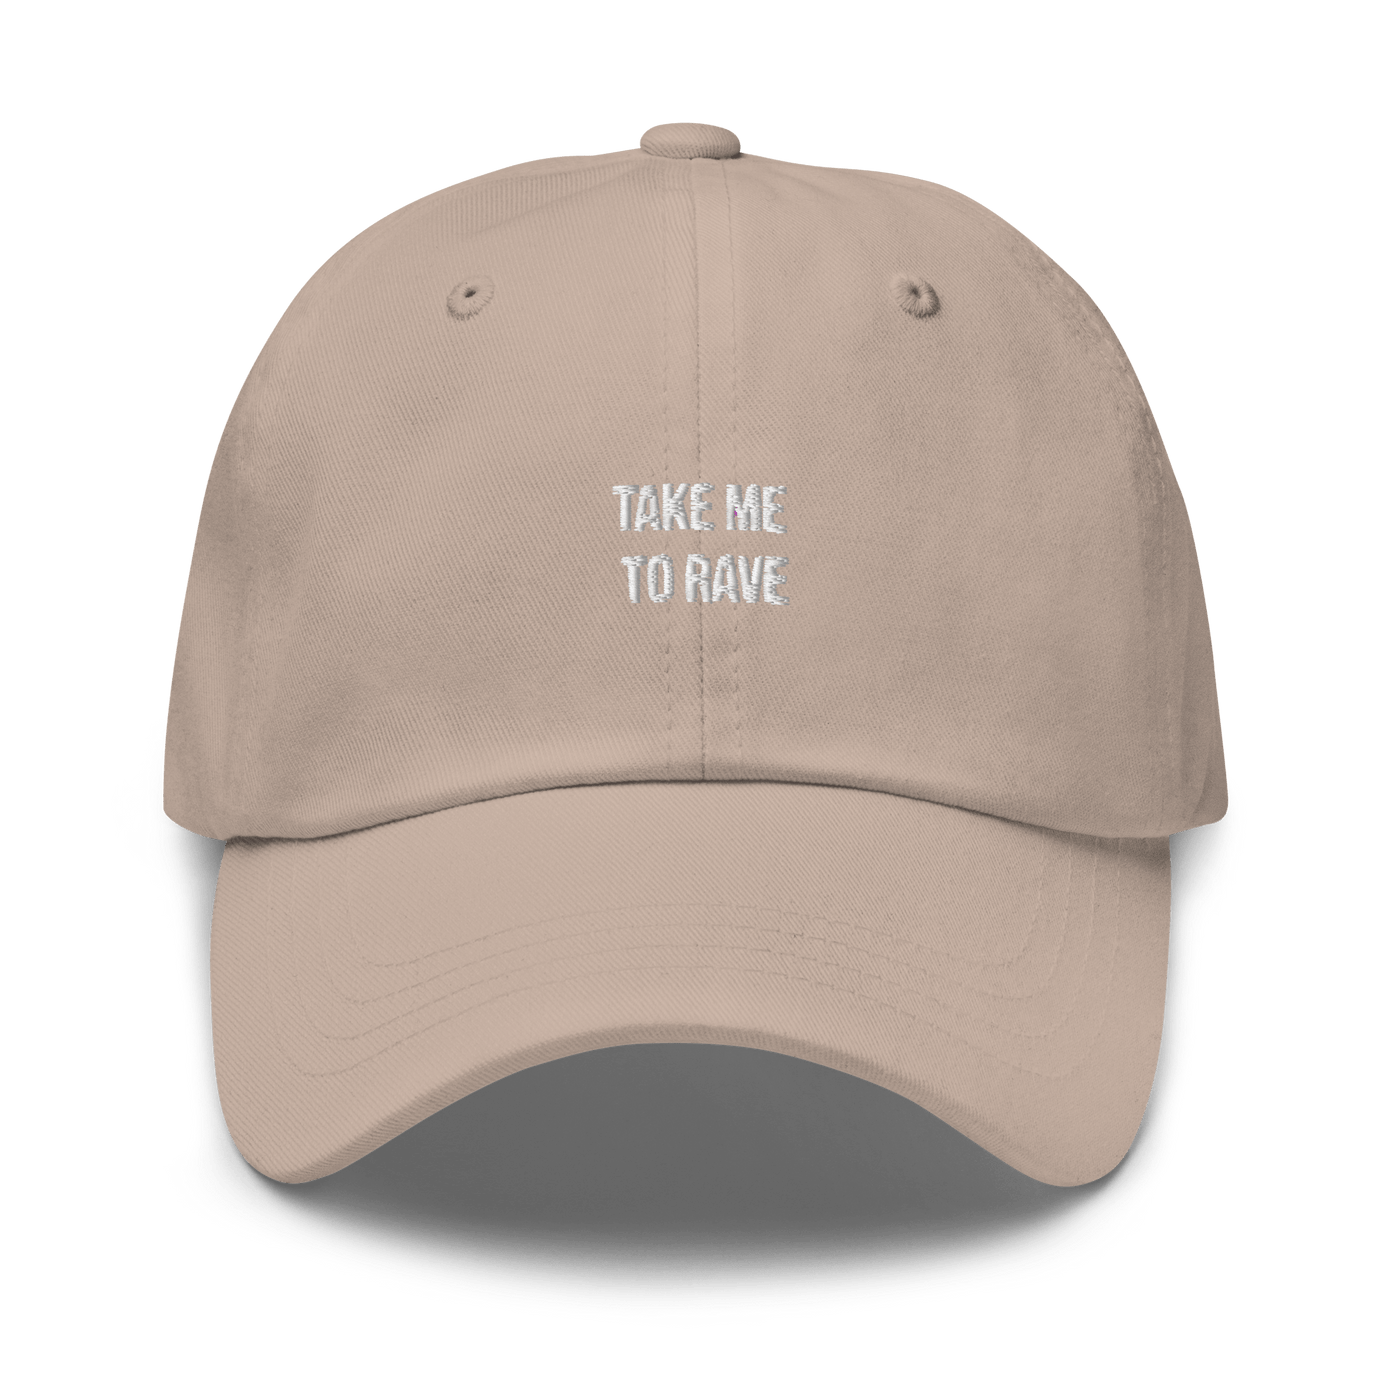 Take me to rave Dad hat - Khaki - - Just Another Cap Store